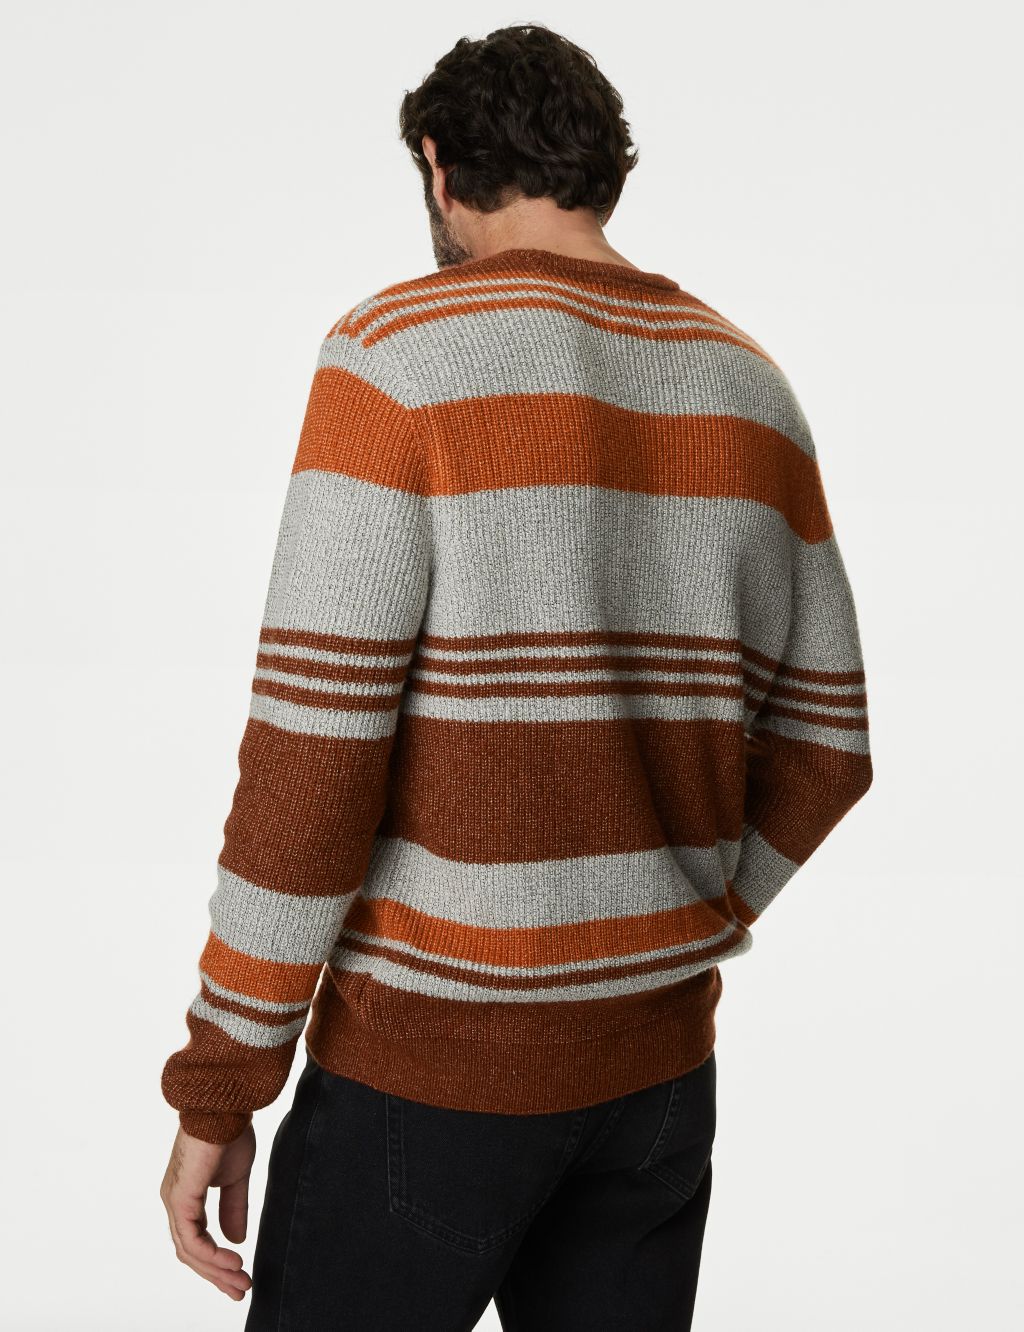 Supersoft Striped Chunky Crew Neck Jumper image 5